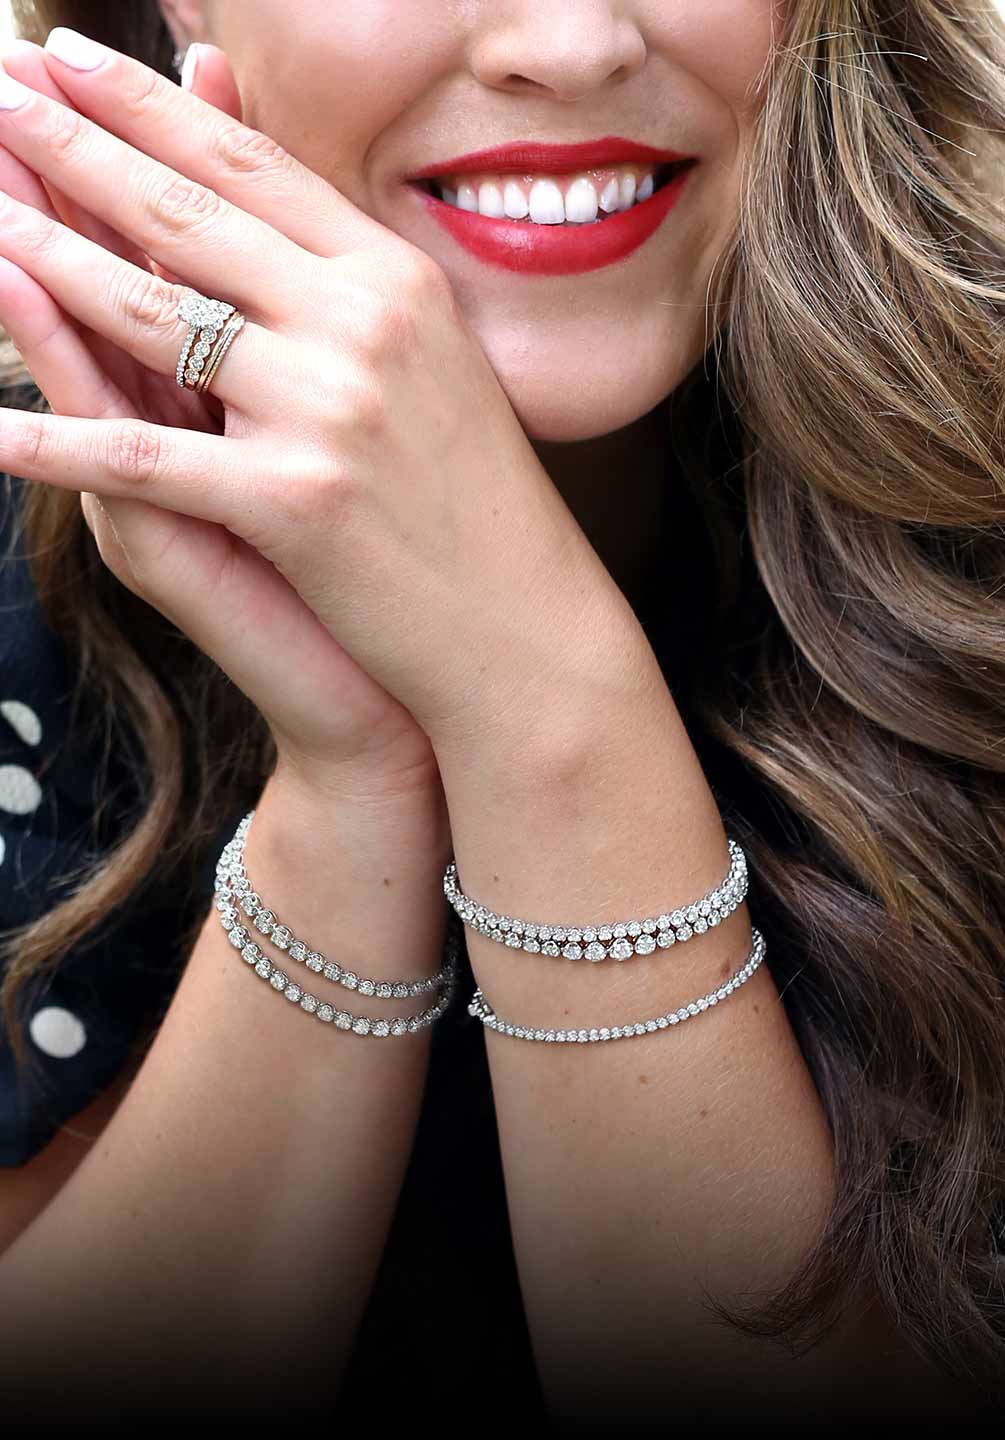 This image features a woman that has her hands together with our diamond bracelets on both arms. The bracelets we offer are tennis bracelets, bangle bracelets, and halo diamond bracelets along with different metal options like 14k yellow gold, white gold, and rose gold. 